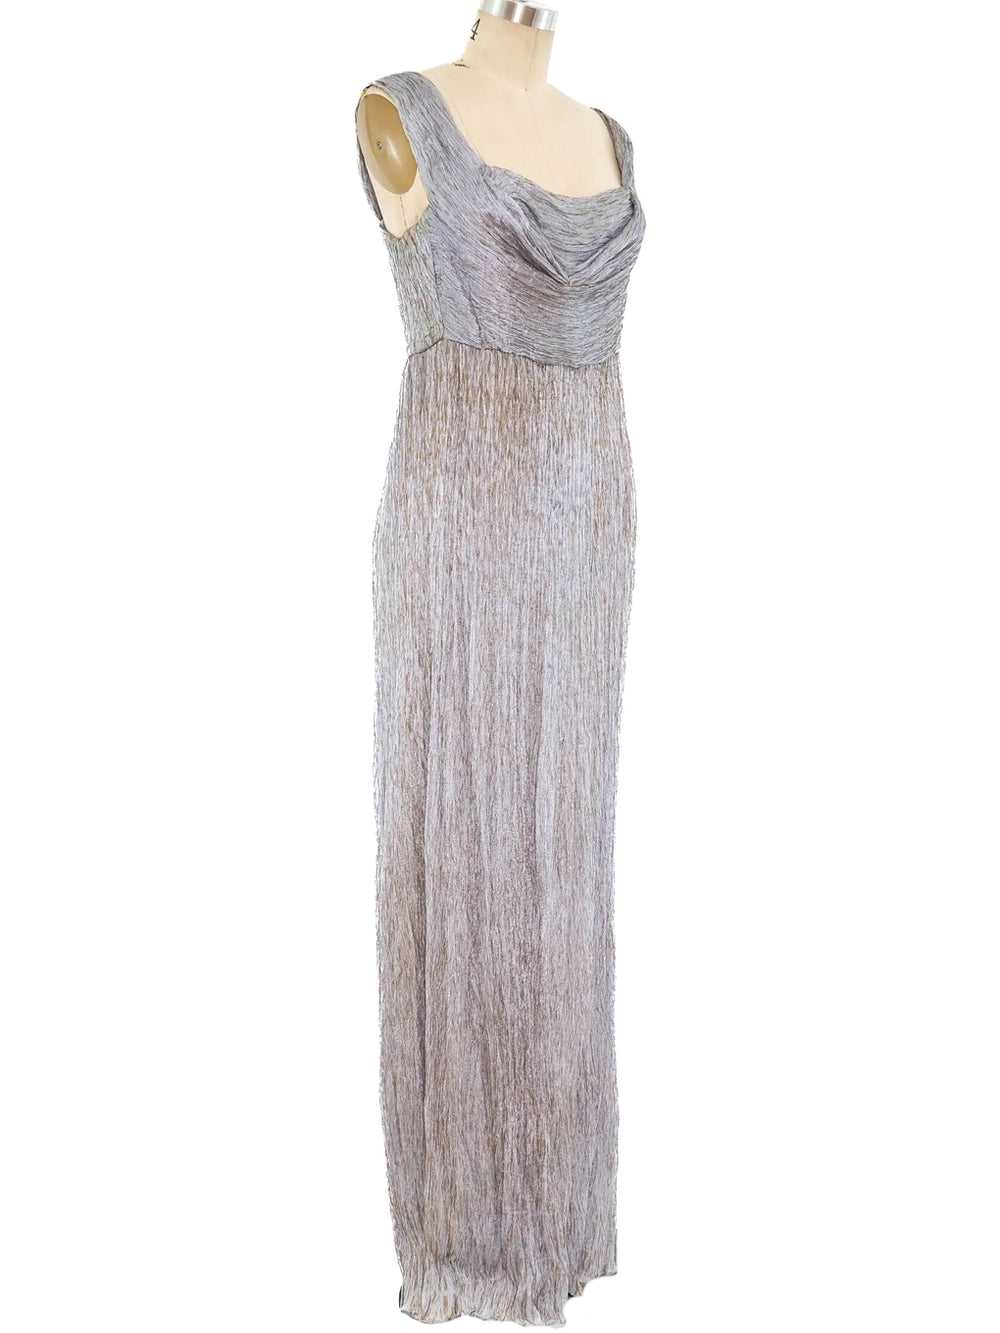 Zandra Rhodes Pleated Column Dress with Duster - image 8